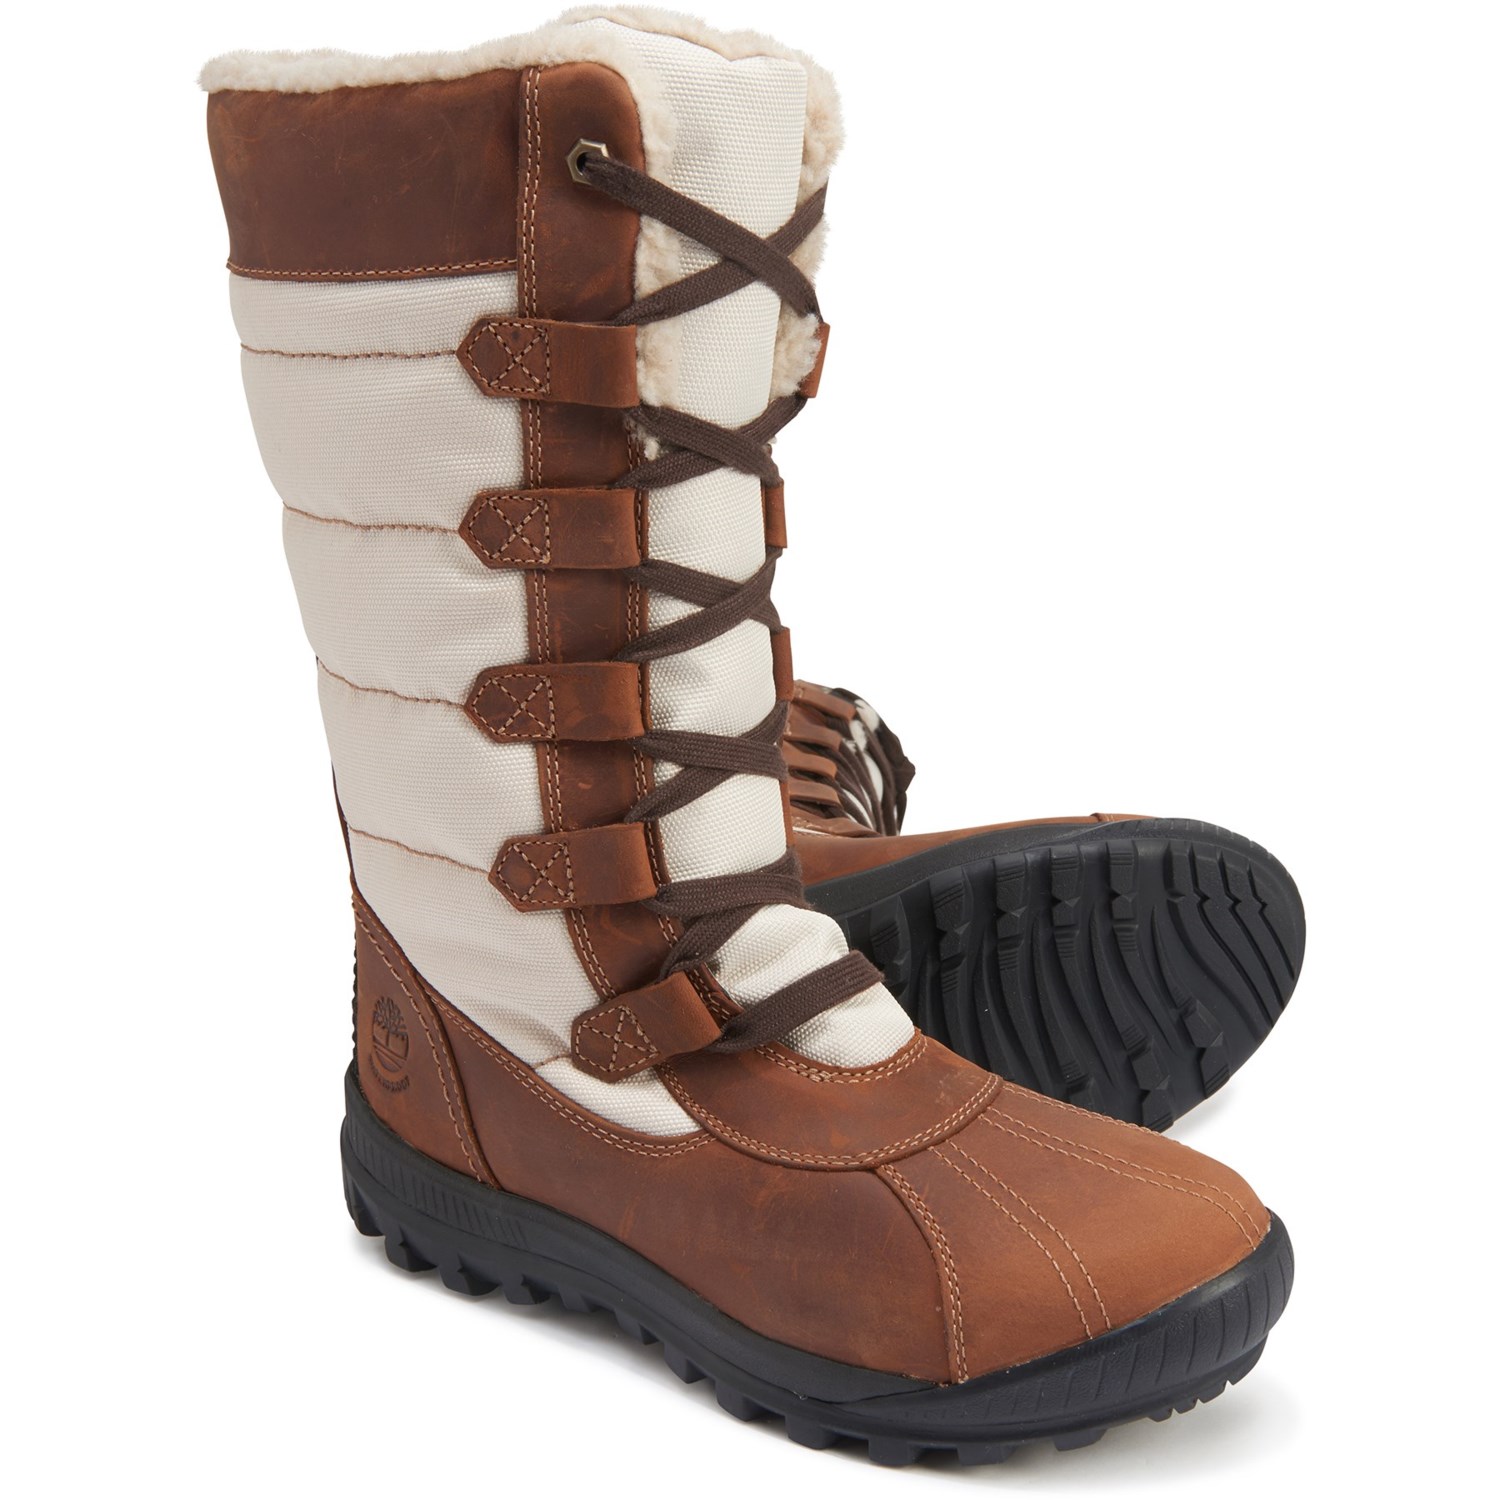 Timberland Mt. Hayes Tall Winter Boots 